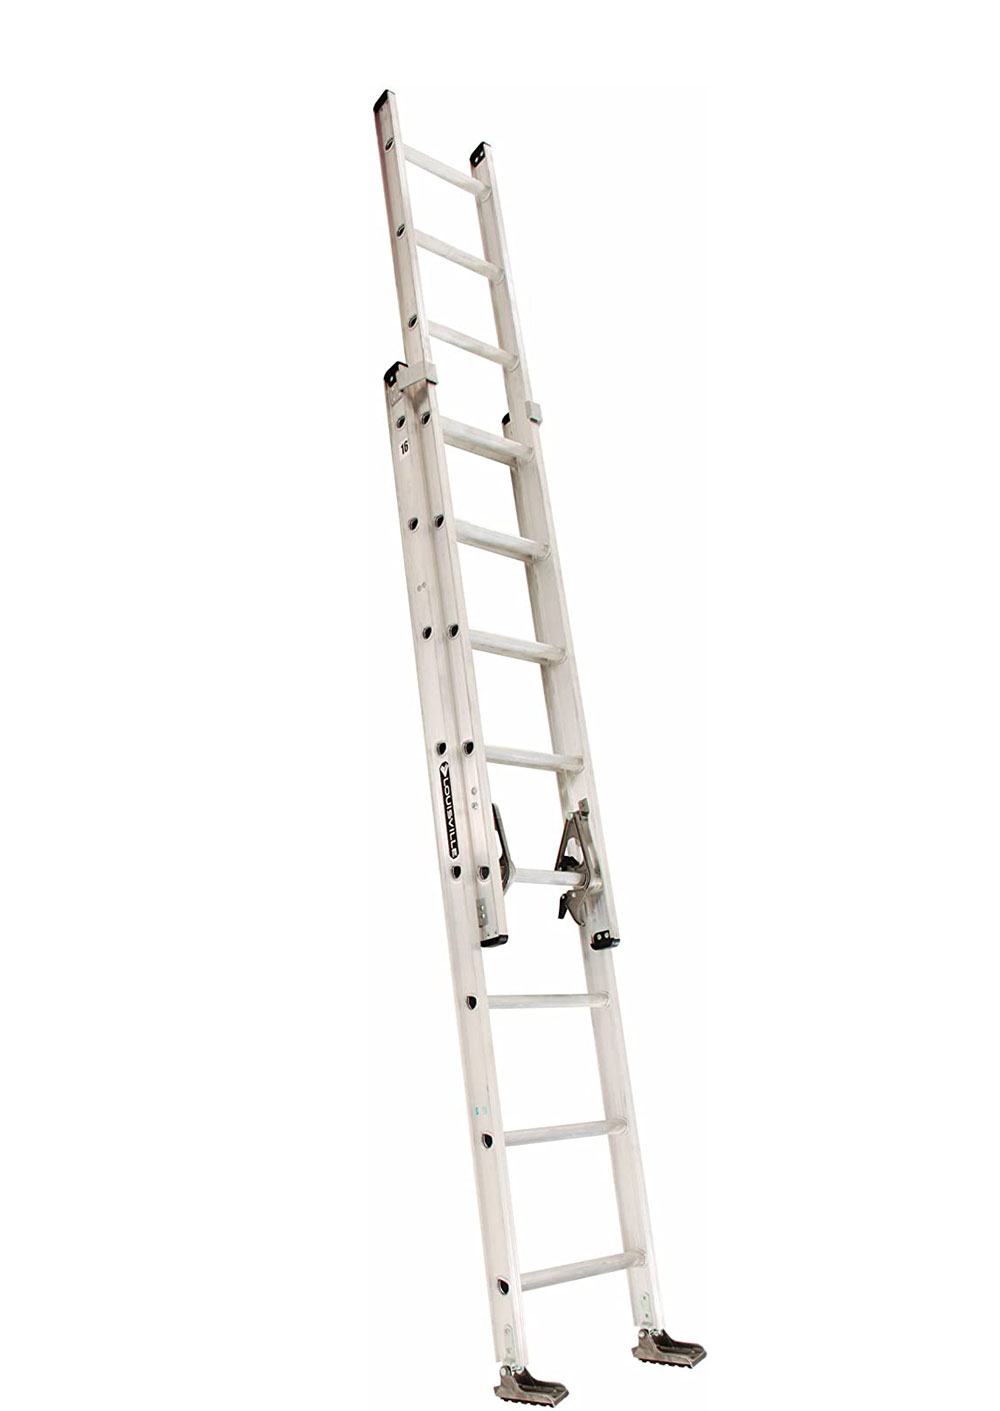 Ladder The Best Window Cleaning Tools to Buy for an Easier Job (Answered)